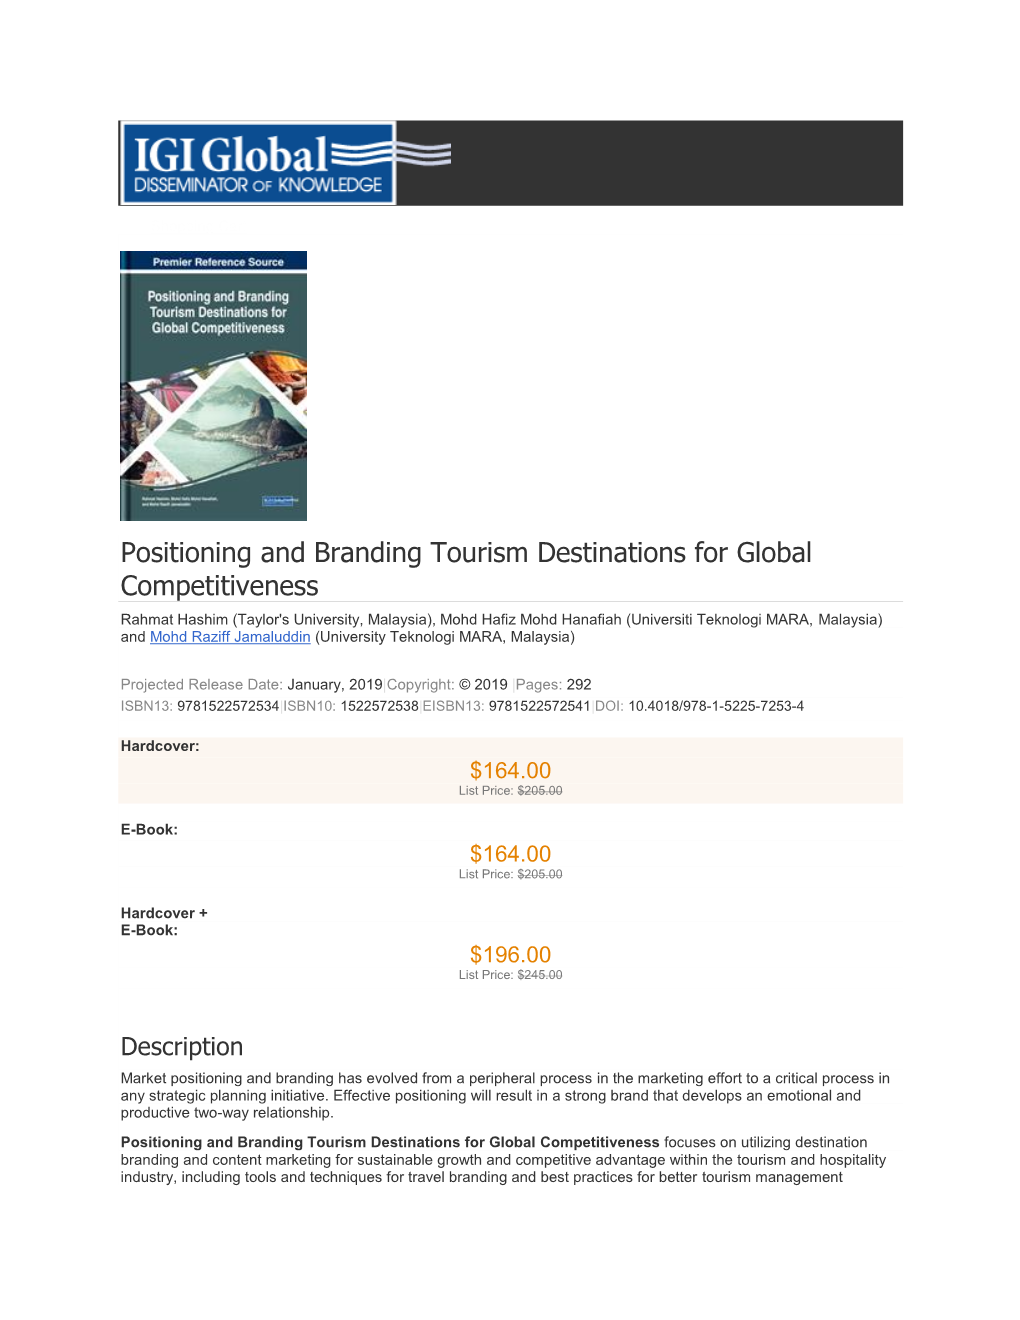 Positioning and Branding Tourism Destinations for Global